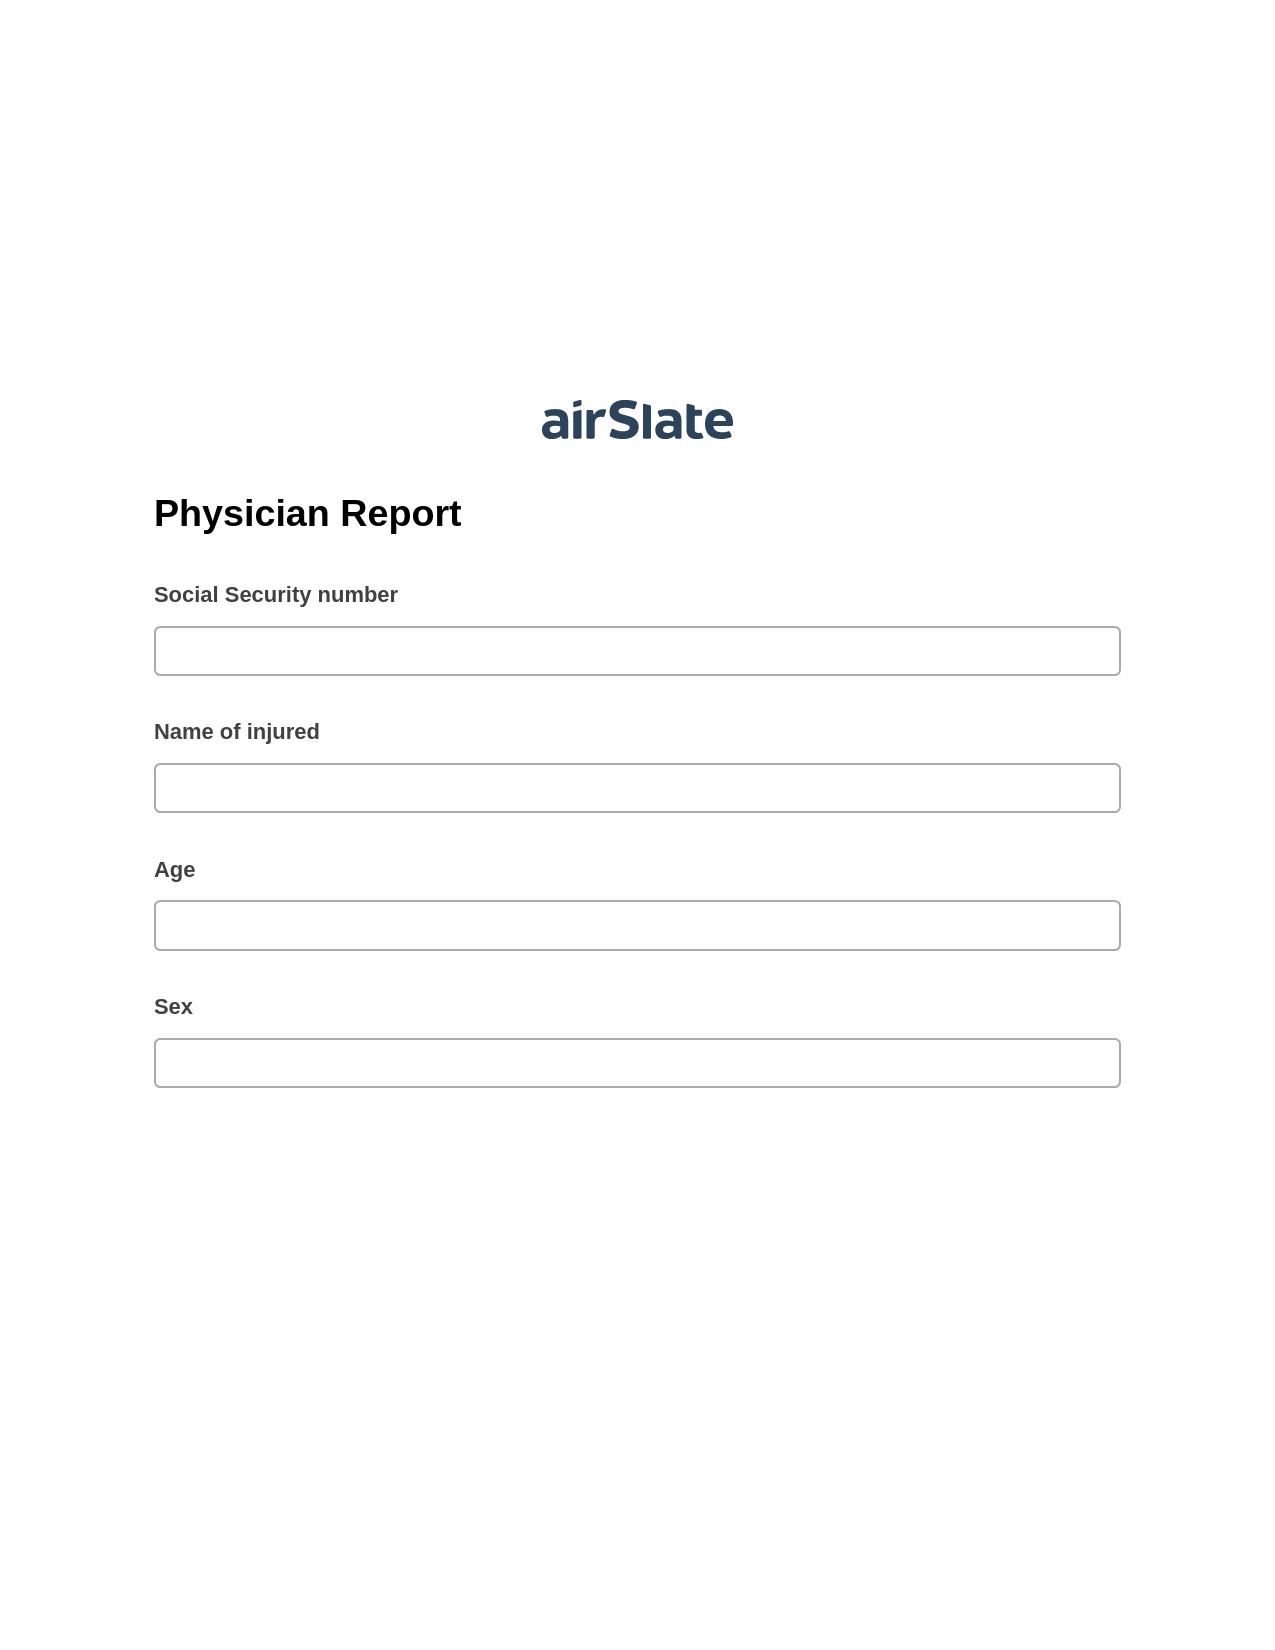 Physician Report Pre-fill from another Slate Bot, Update MS Dynamics 365 Record Bot, Email Notification Postfinish Bot